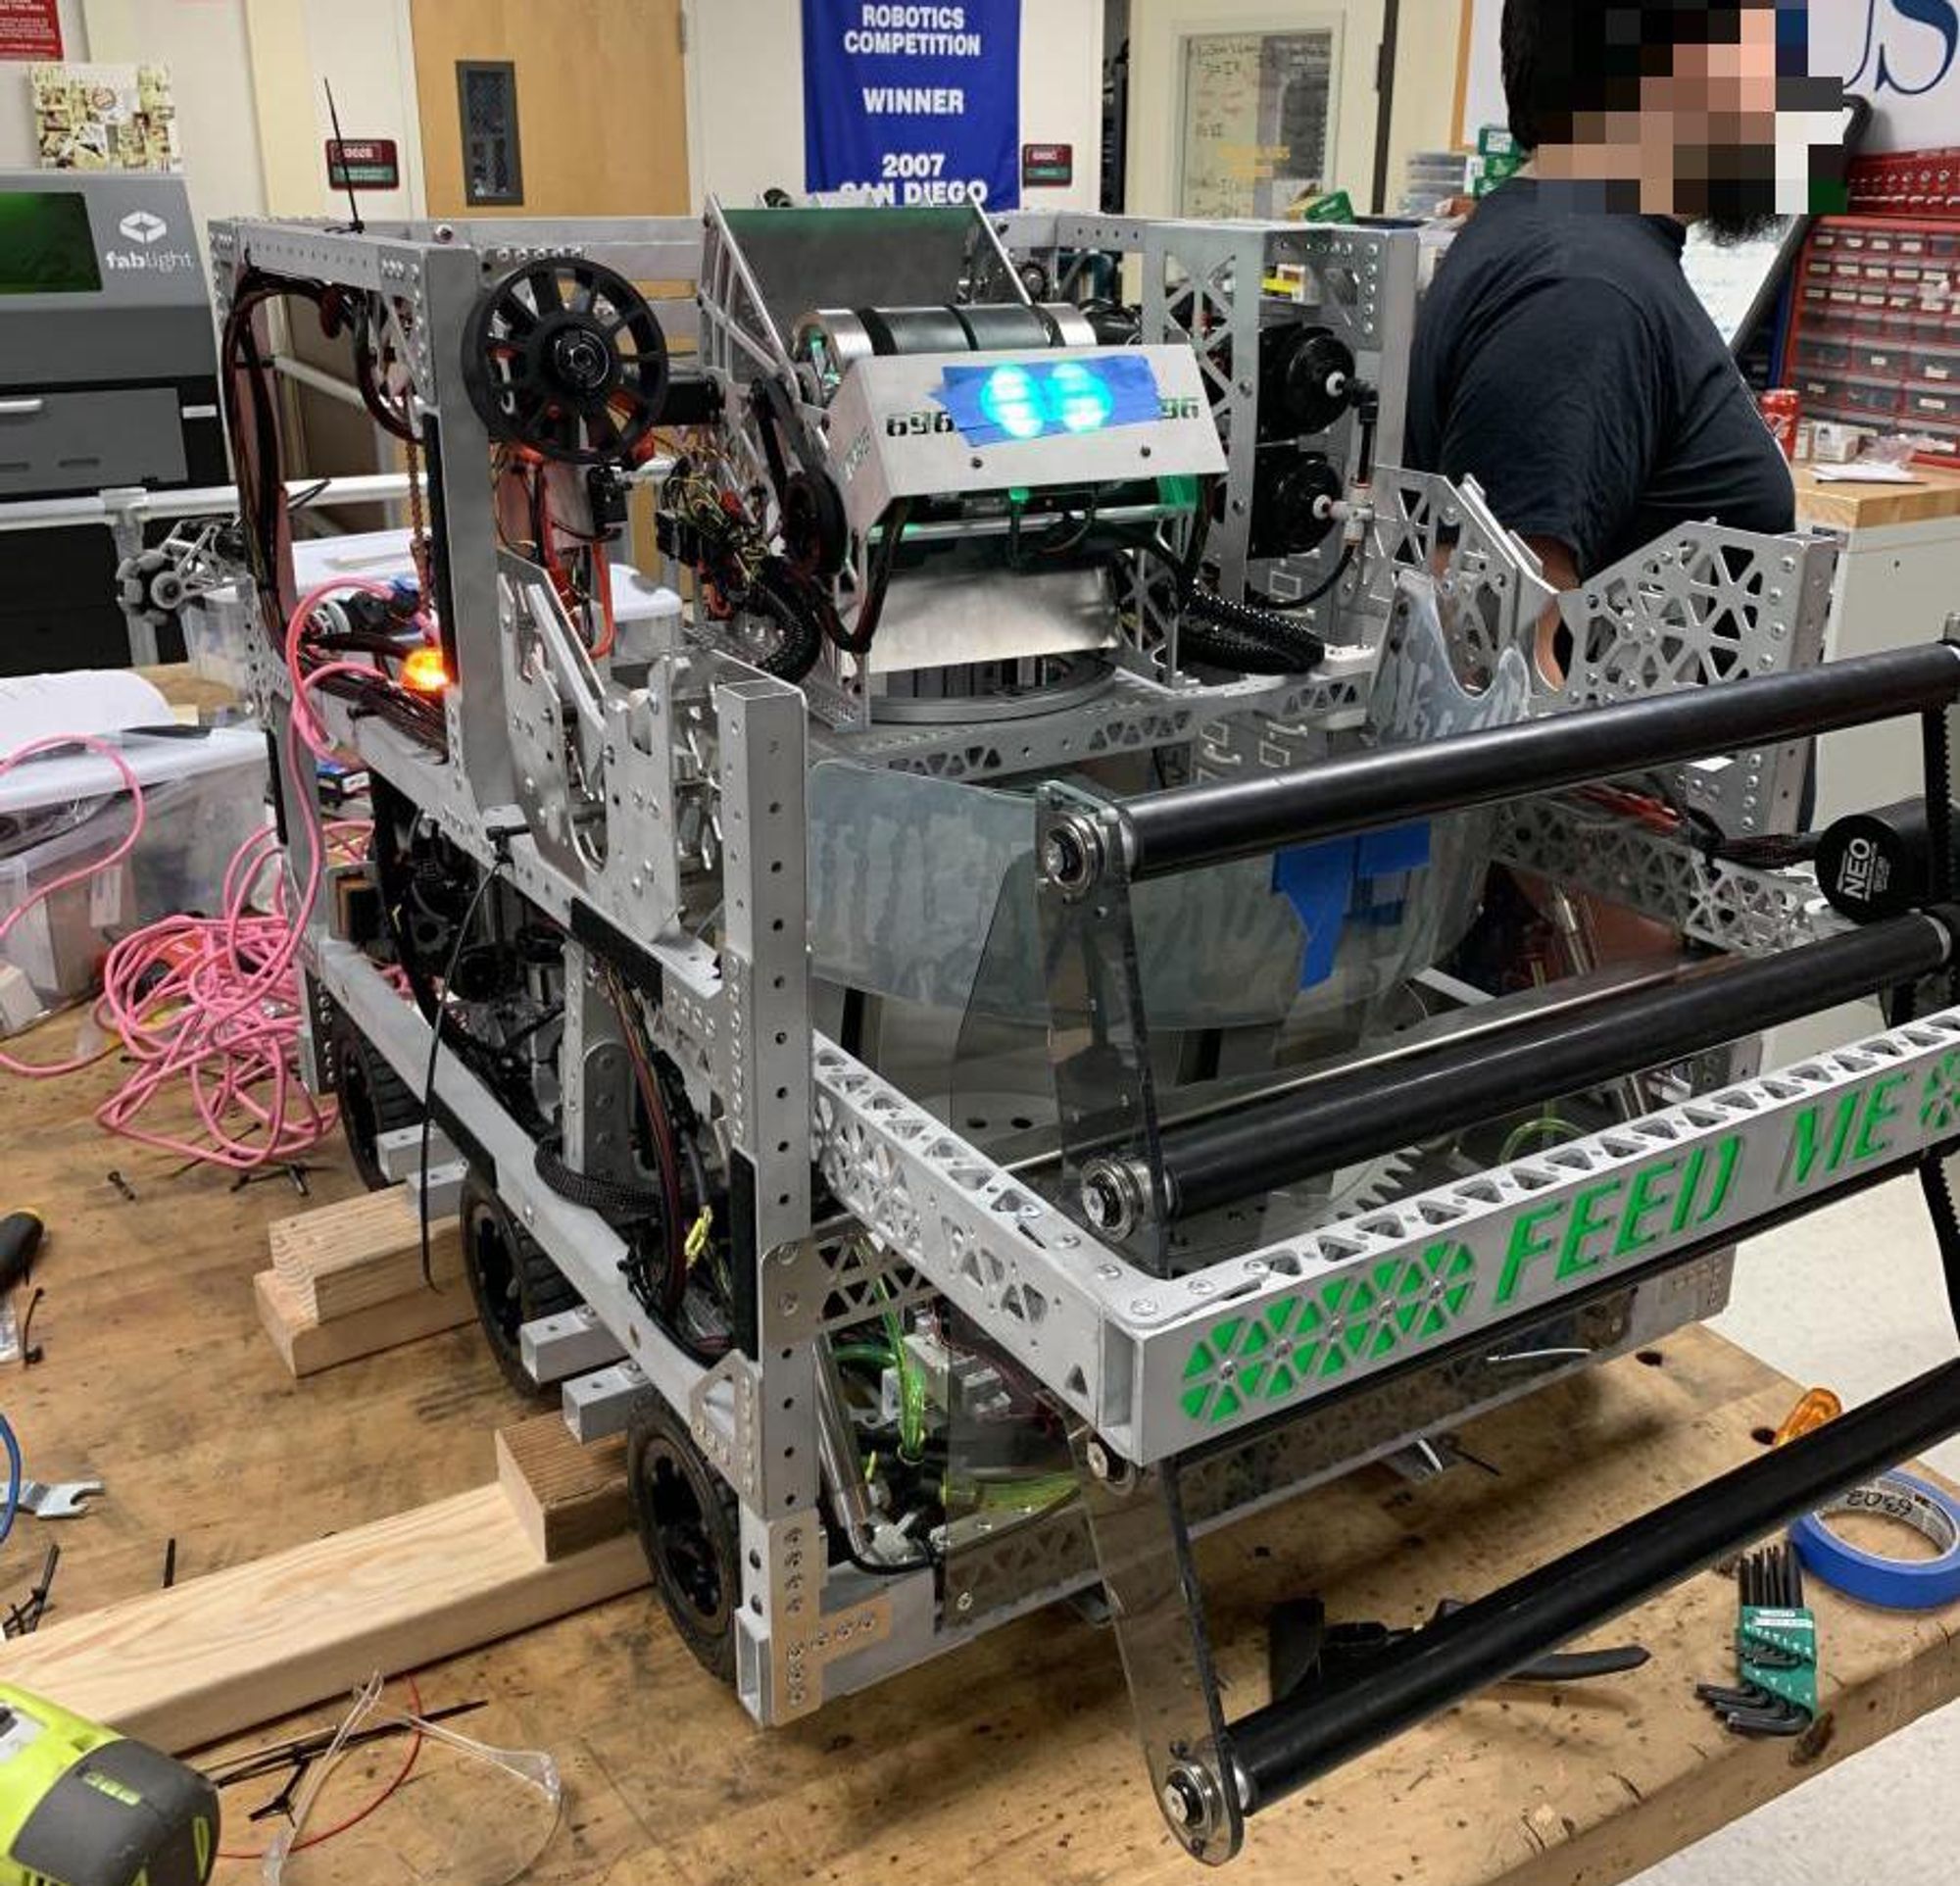 Our finished 2020 competition robot “Zenith” at the shop.